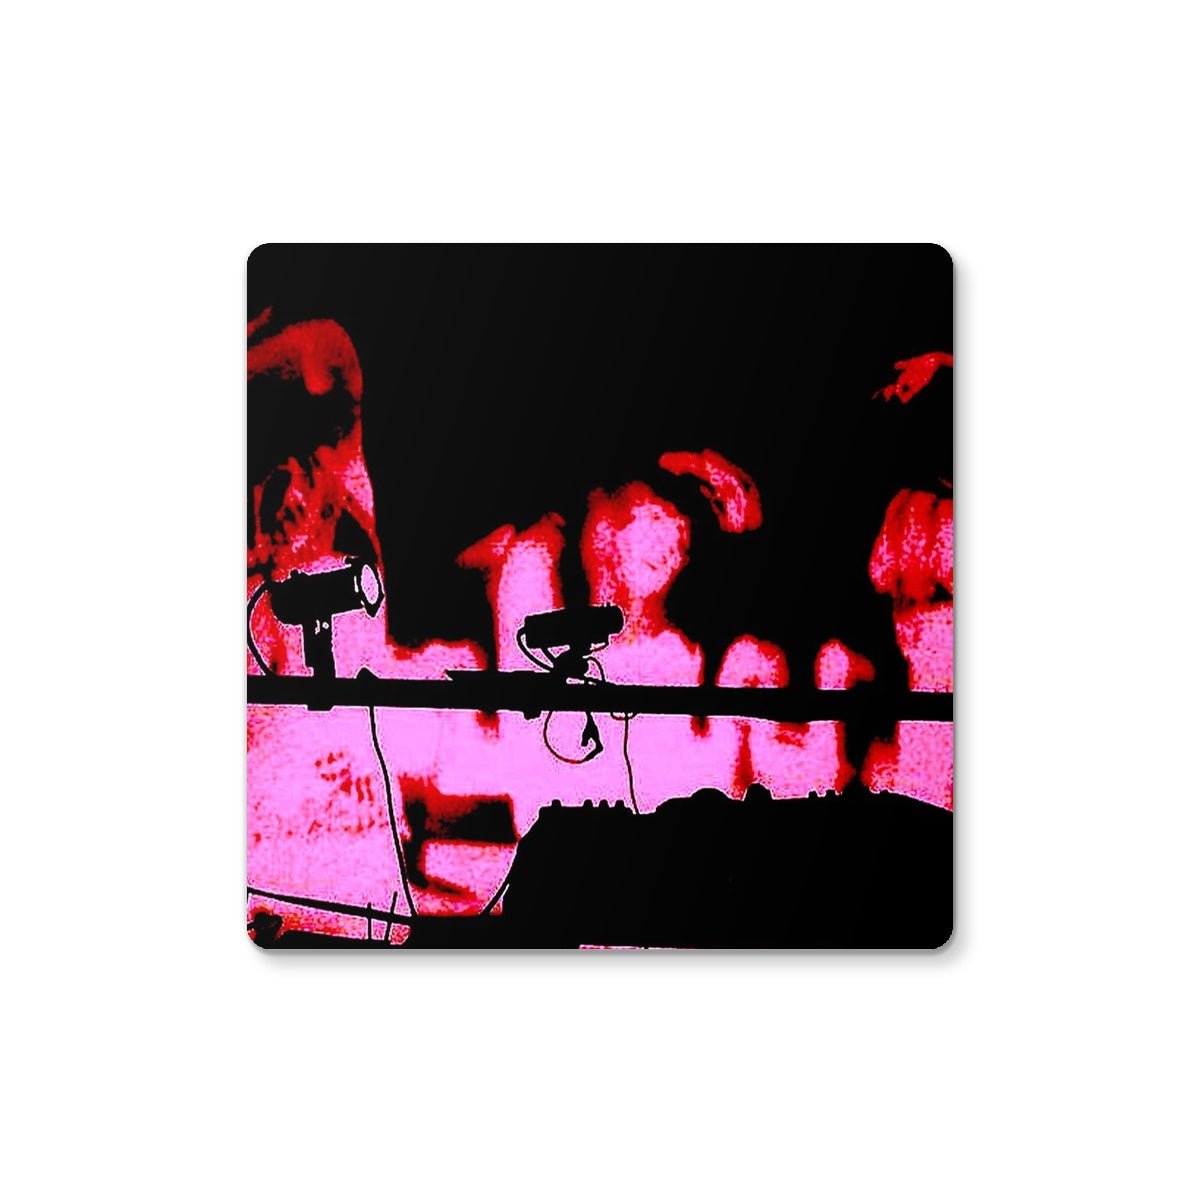 Dancing With The Devils Art Gifts Coaster-Coasters-Abstract & Impressionistic Art Gallery-2 Coasters-Paintings, Prints, Homeware, Art Gifts From Scotland By Scottish Artist Kevin Hunter